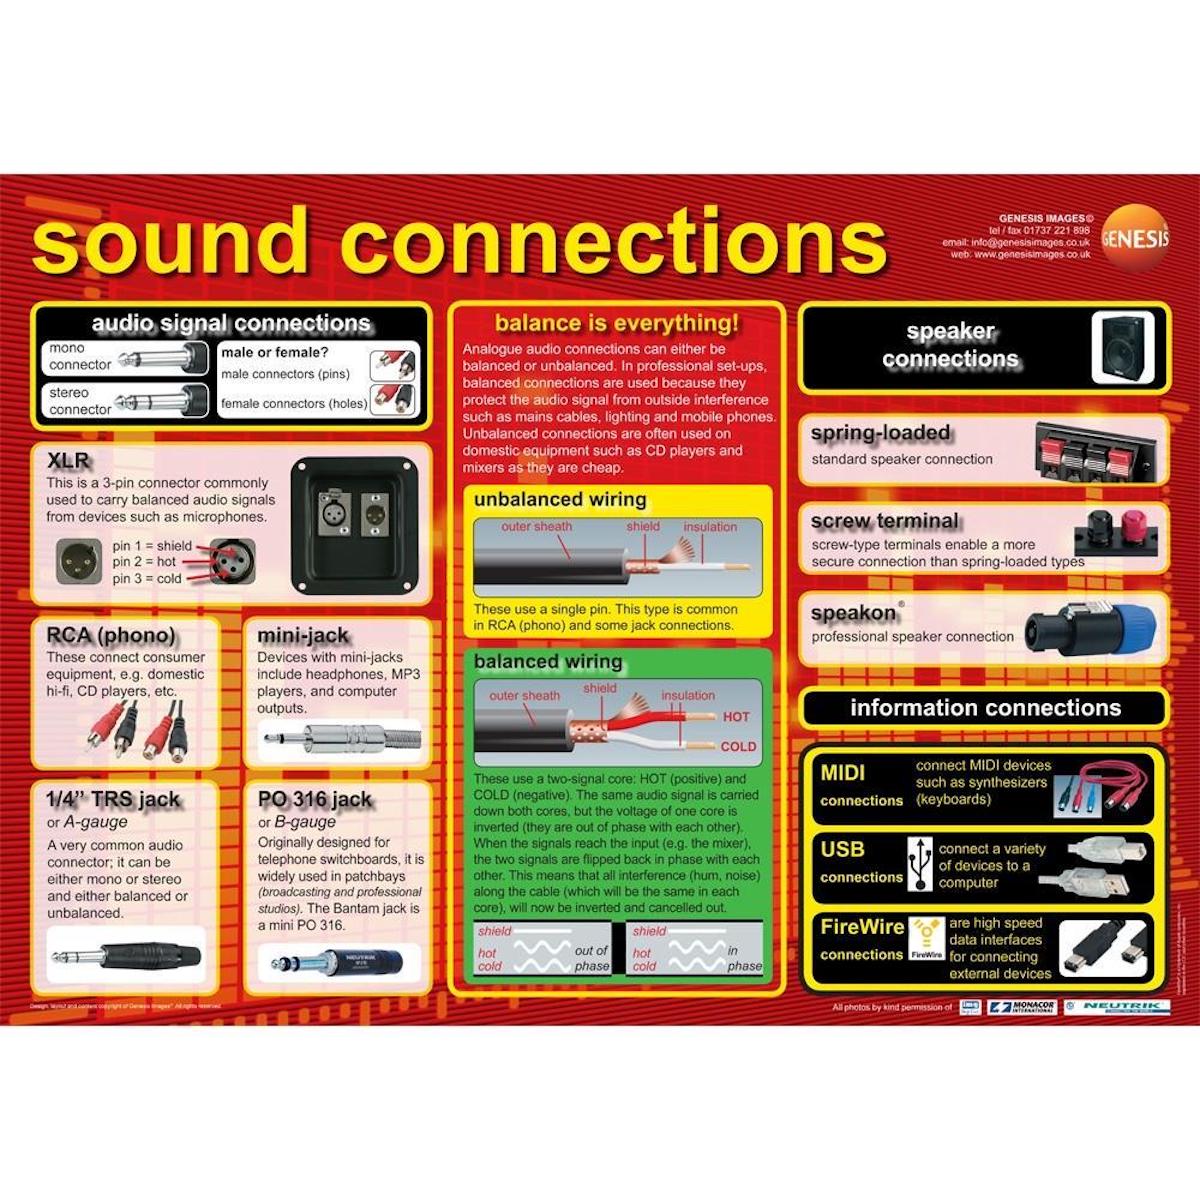 Music technology Cables and Connectors - A1 wall poster